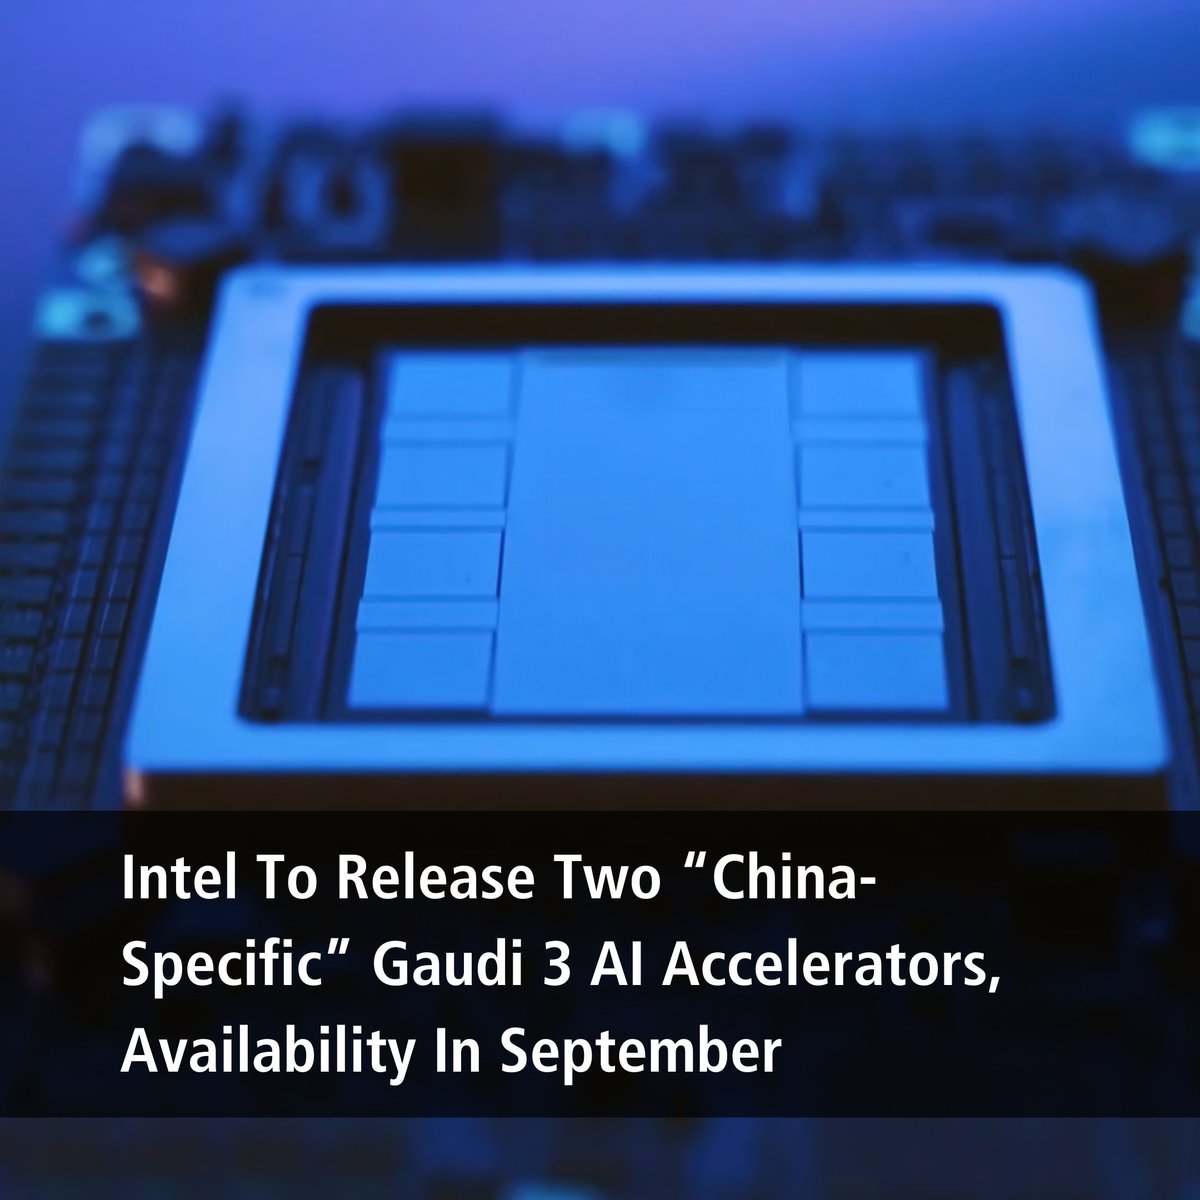 Intel has outlined its plan for future Chinese AI markets, revealing the debut of two 'China-specific' Gaudi 3 AI accelerators, potentially surpassing competitors. wccftech.com/intel-to-relea…